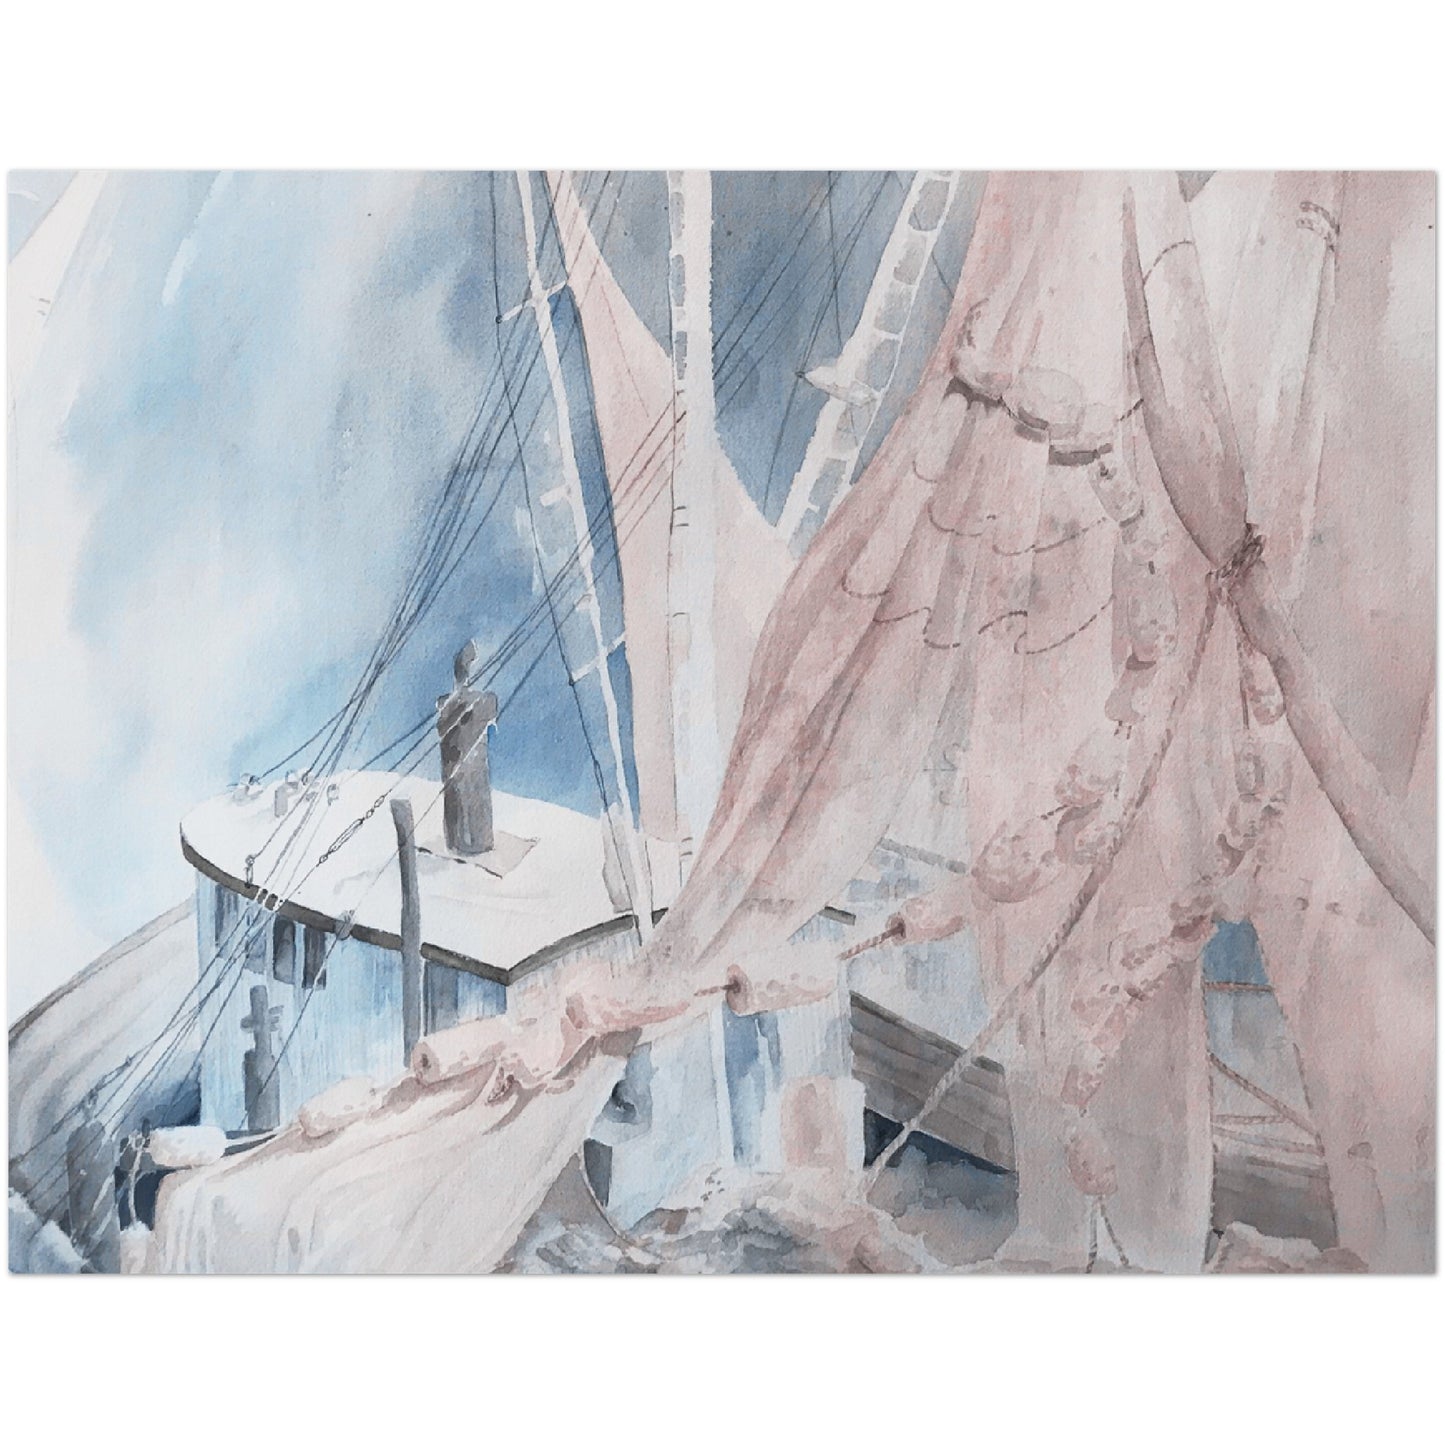 Pack of 10 Postcards "Sailboat" Watercolor (2-sided, No envelopes) by Barbara Cleary